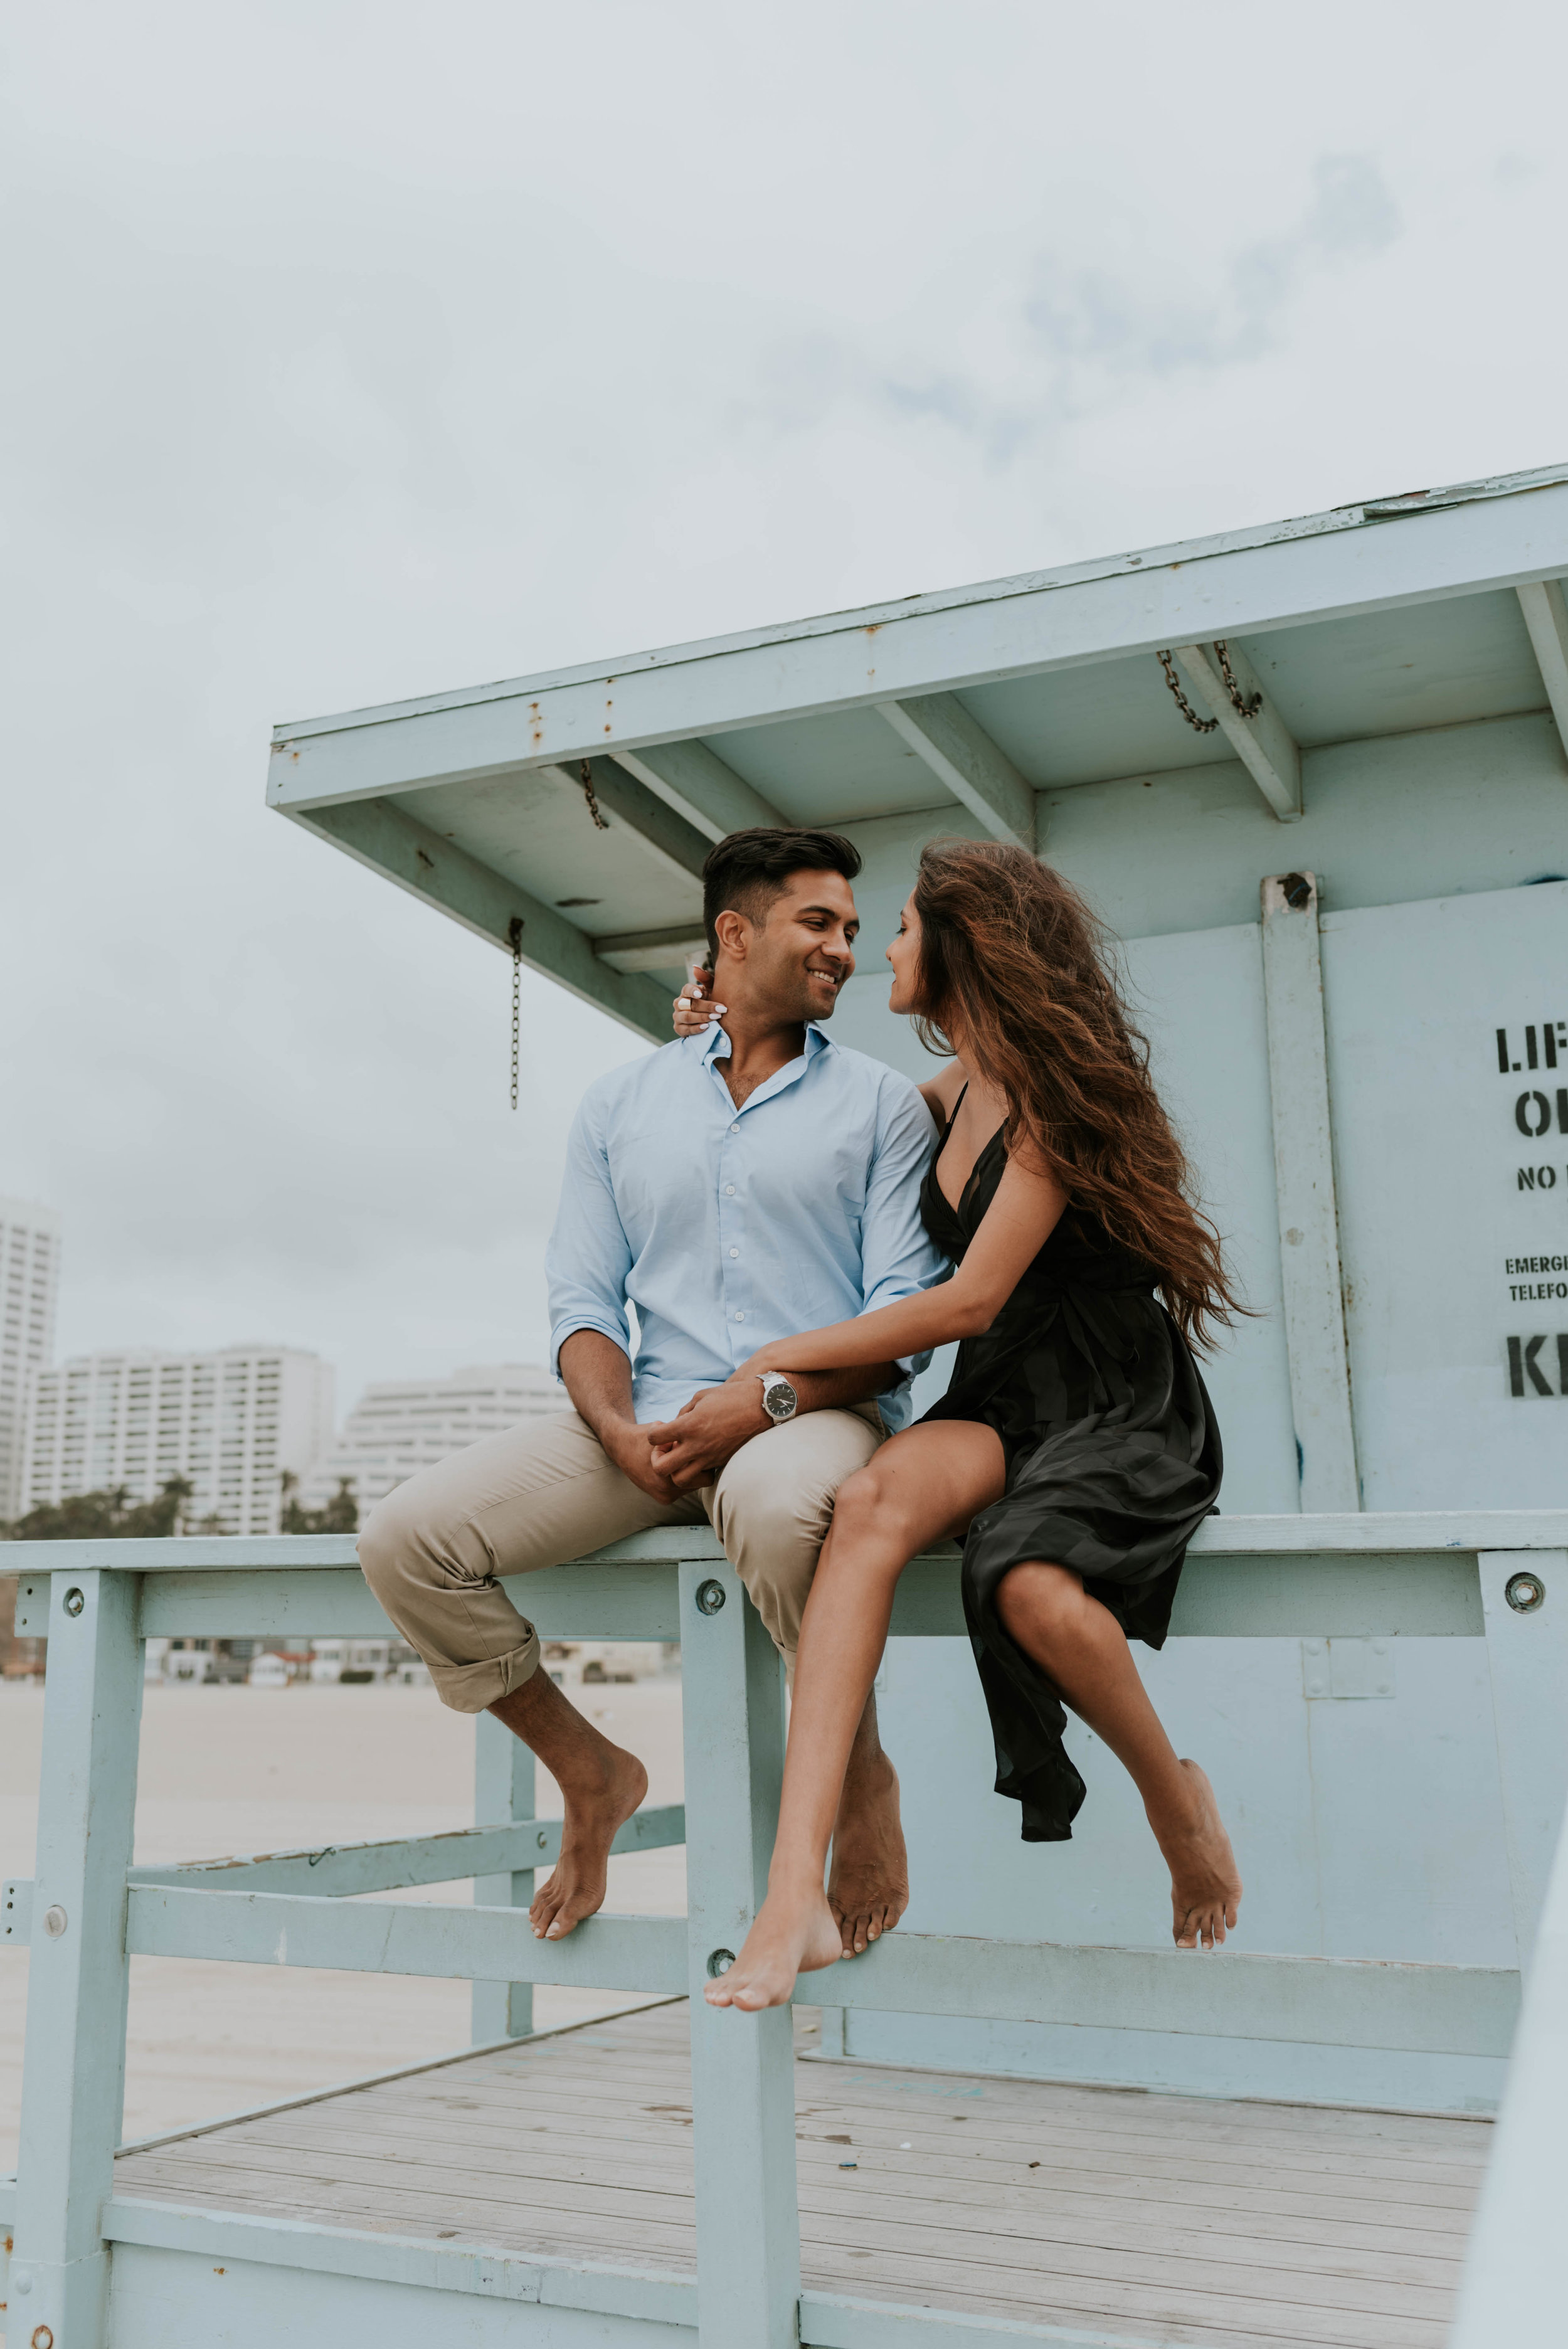 Couple on a beach engagement photoshoot. Girl wears black midi dress and guy wears blue shirt with tan pants.